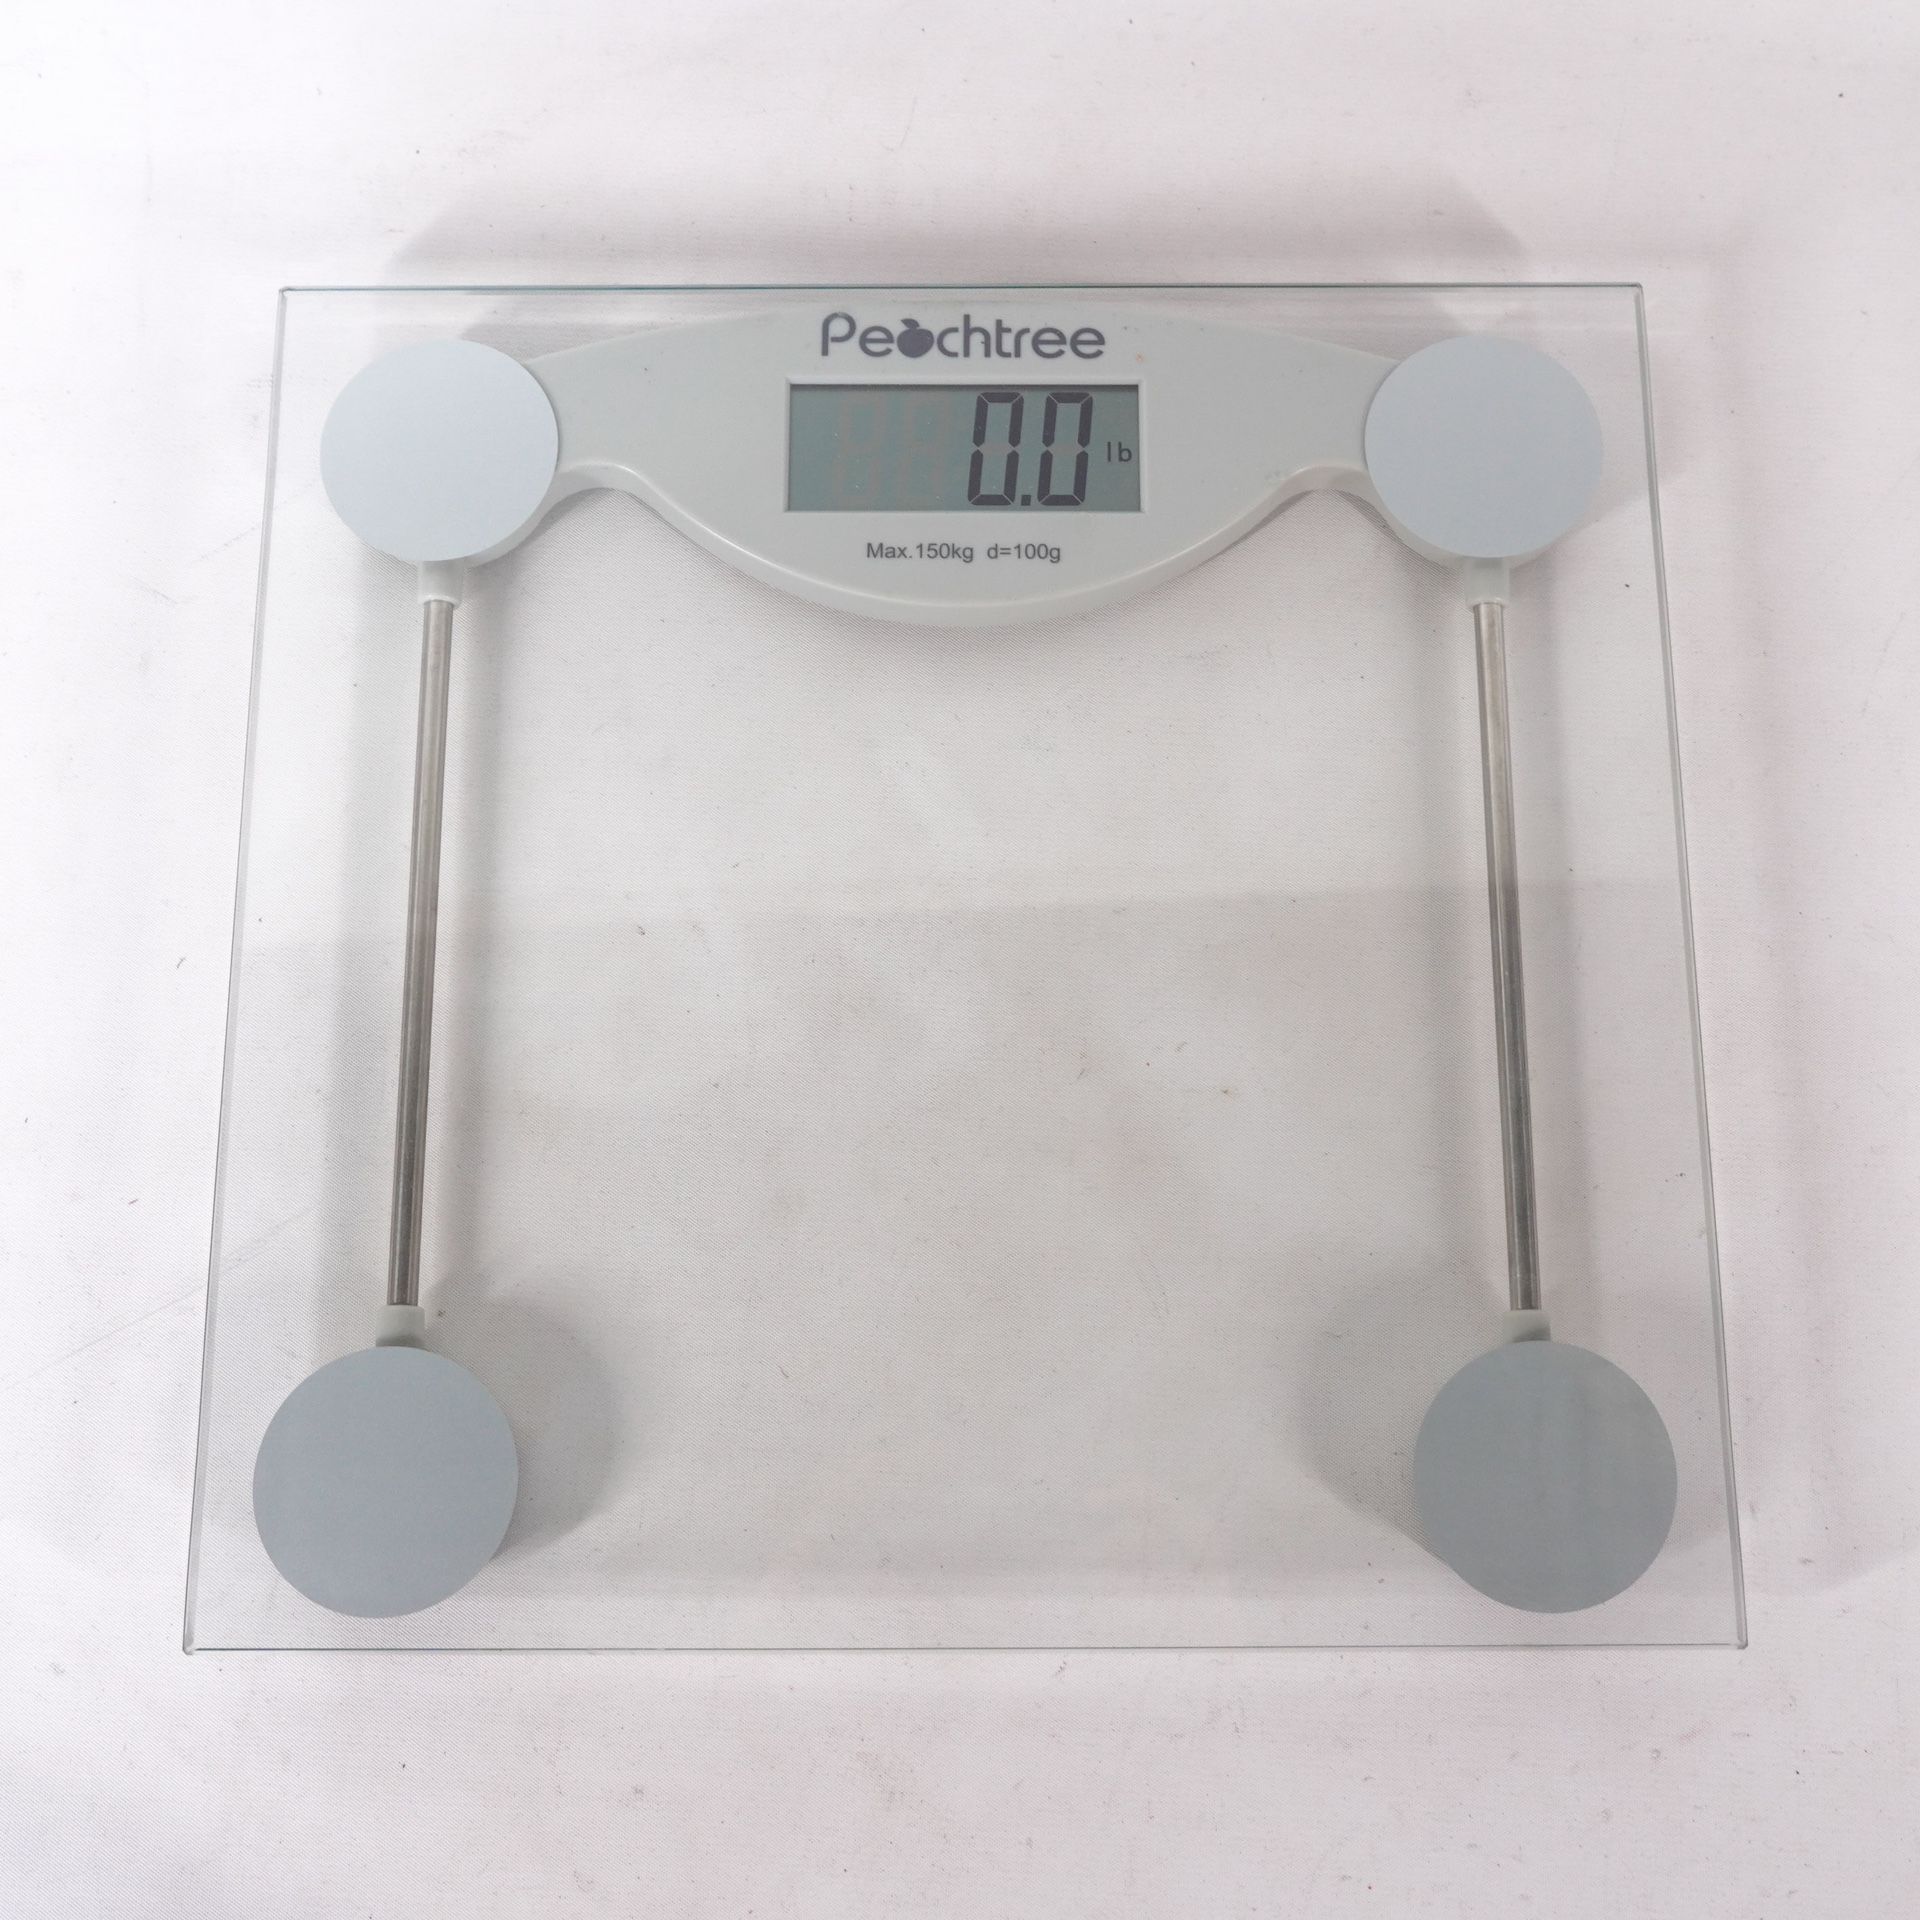 Peachtree Weight Scale Glass Digital Model GS-150 Works, Batteries Not Included